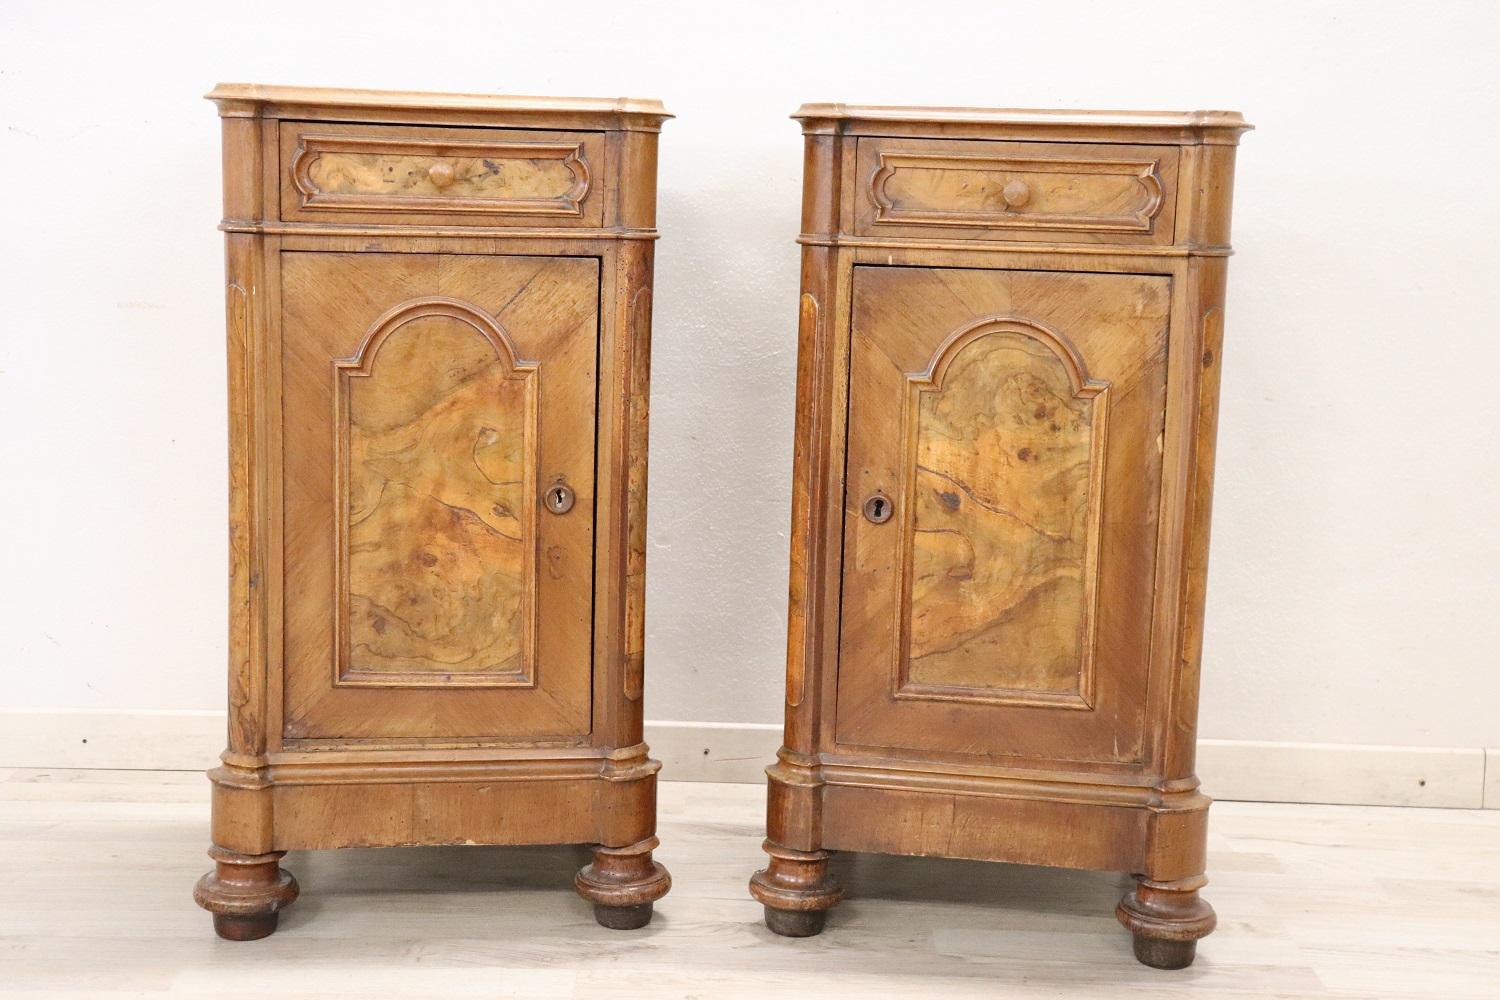 Rare and fine quality Italian Louis Philippe antique pair of nightstands, 1850s. The nightstands are in precious walnut wood.
On the front, precious walnut briar decorates the door and the drawer. Large useful space equipped with a small drawer.